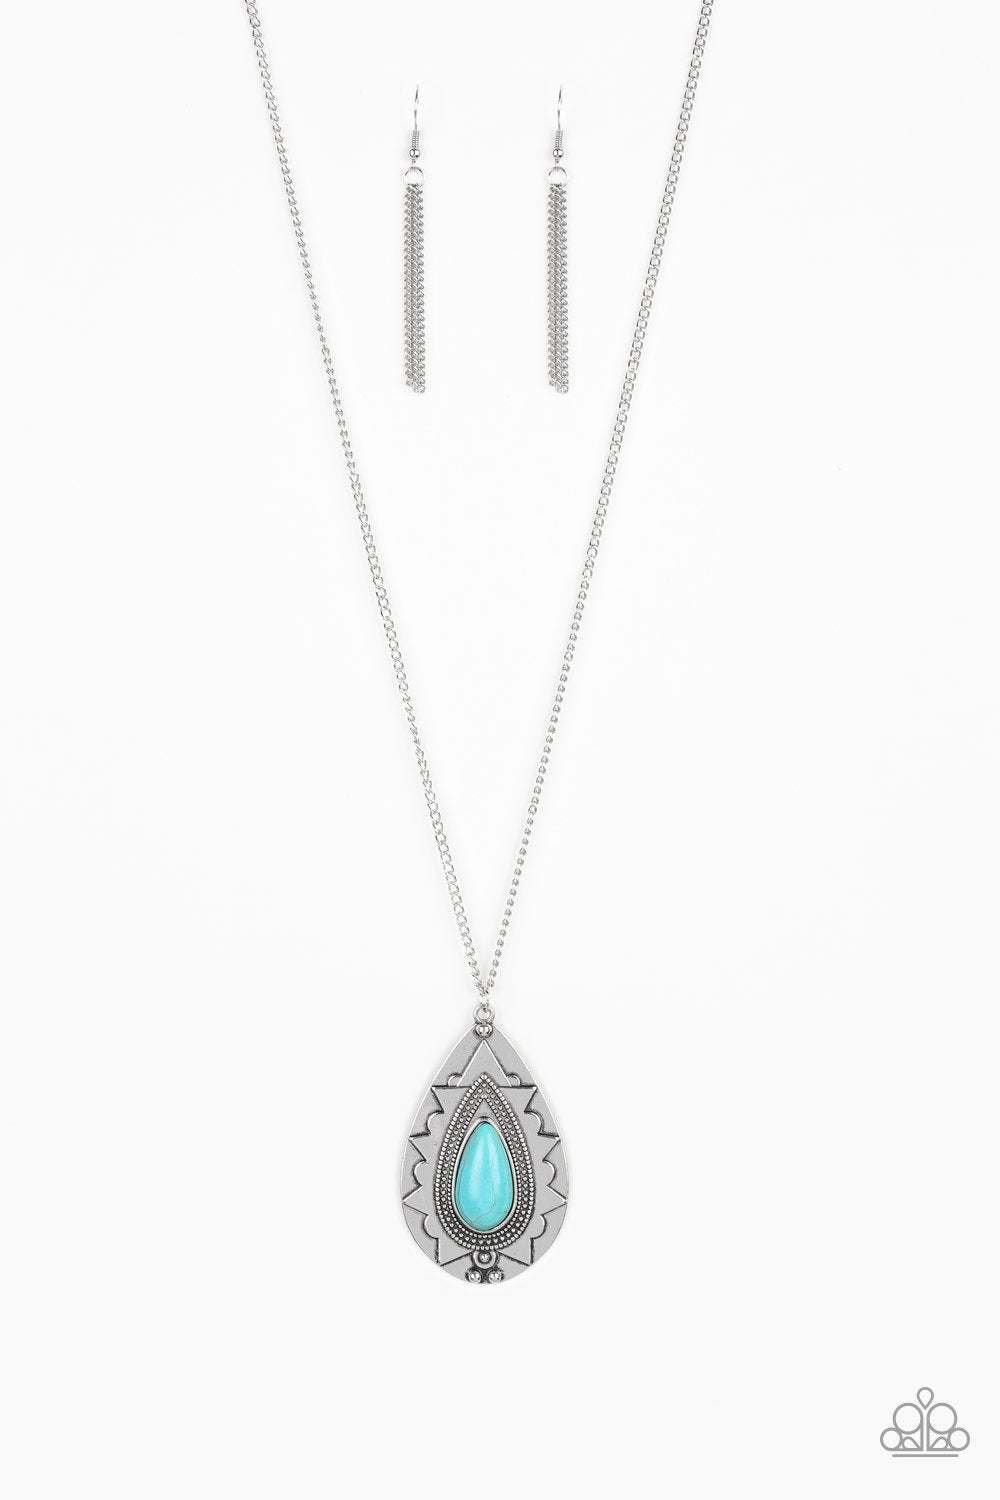 Sedona Solstice Turquoise Blue Teardrop Necklace - Paparazzi Accessories- lightbox - CarasShop.com - $5 Jewelry by Cara Jewels